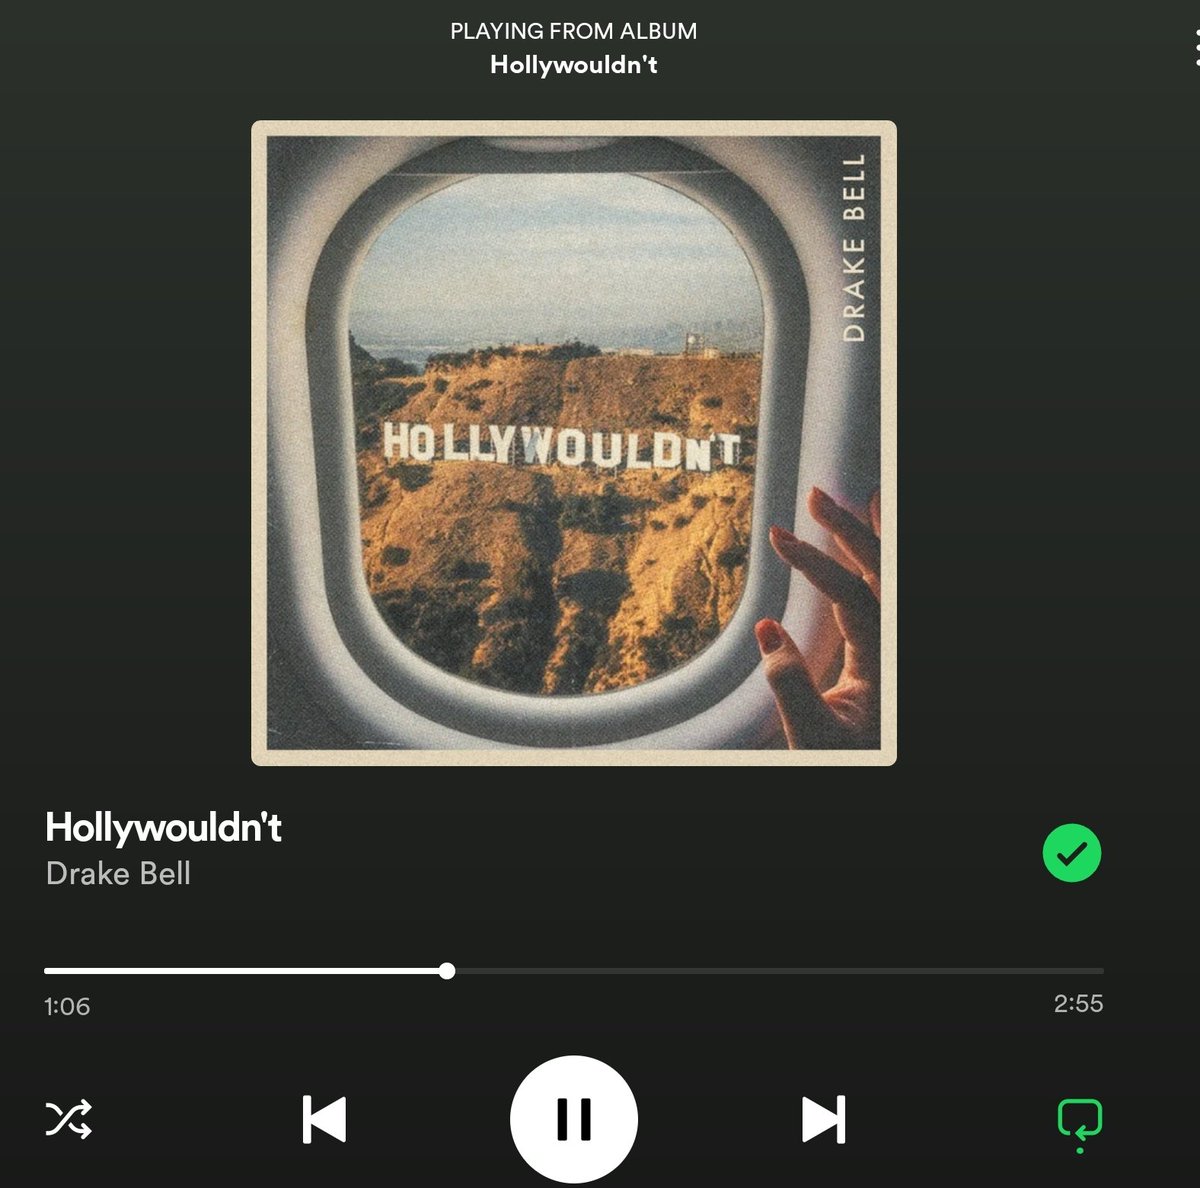 @DrakeBell dropping a banger that makes me feel like it was 15 years ago again. Oh and fuck Hollywood.